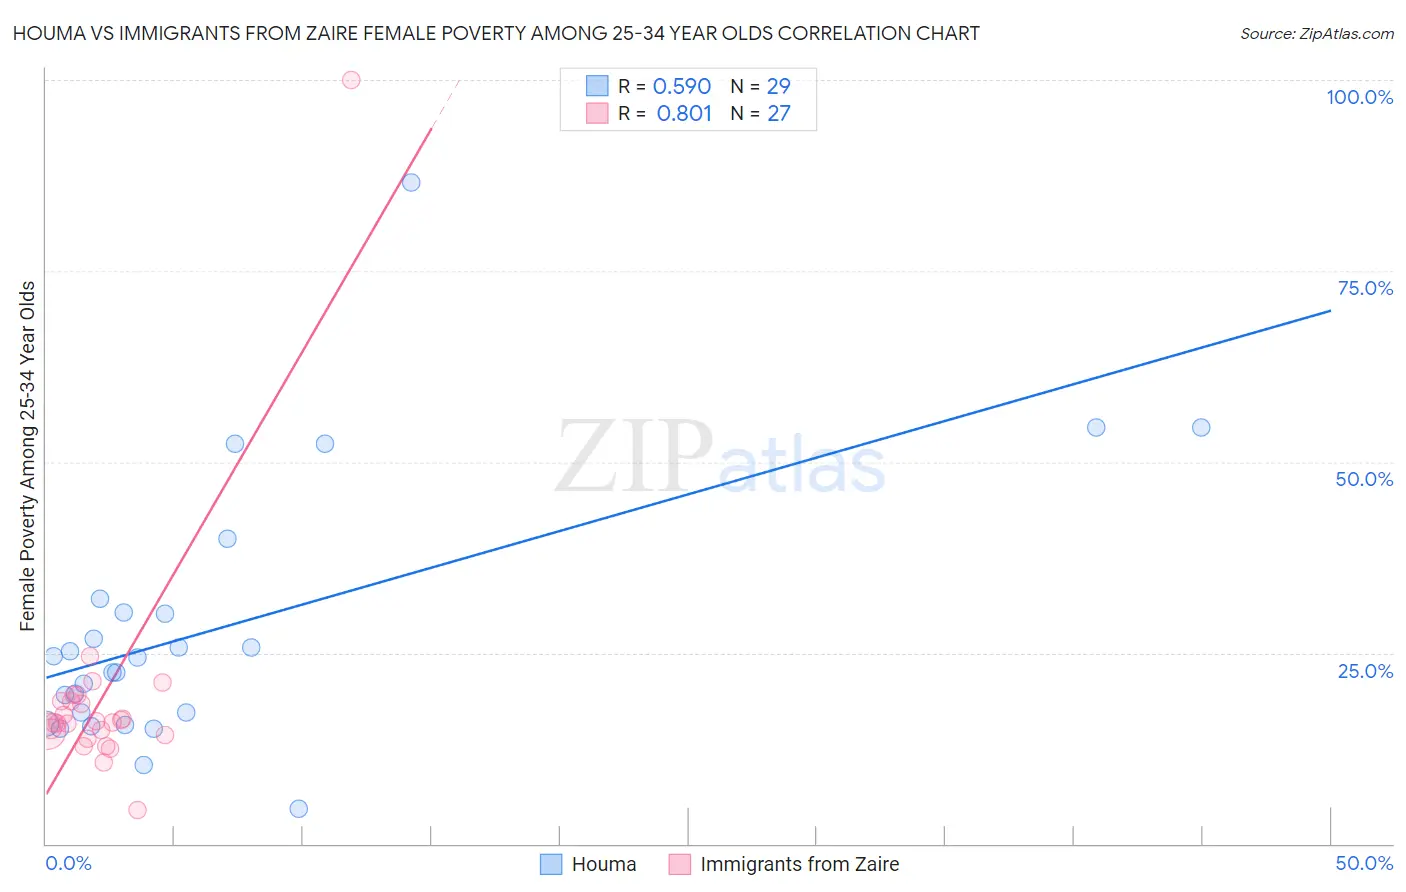 Houma vs Immigrants from Zaire Female Poverty Among 25-34 Year Olds